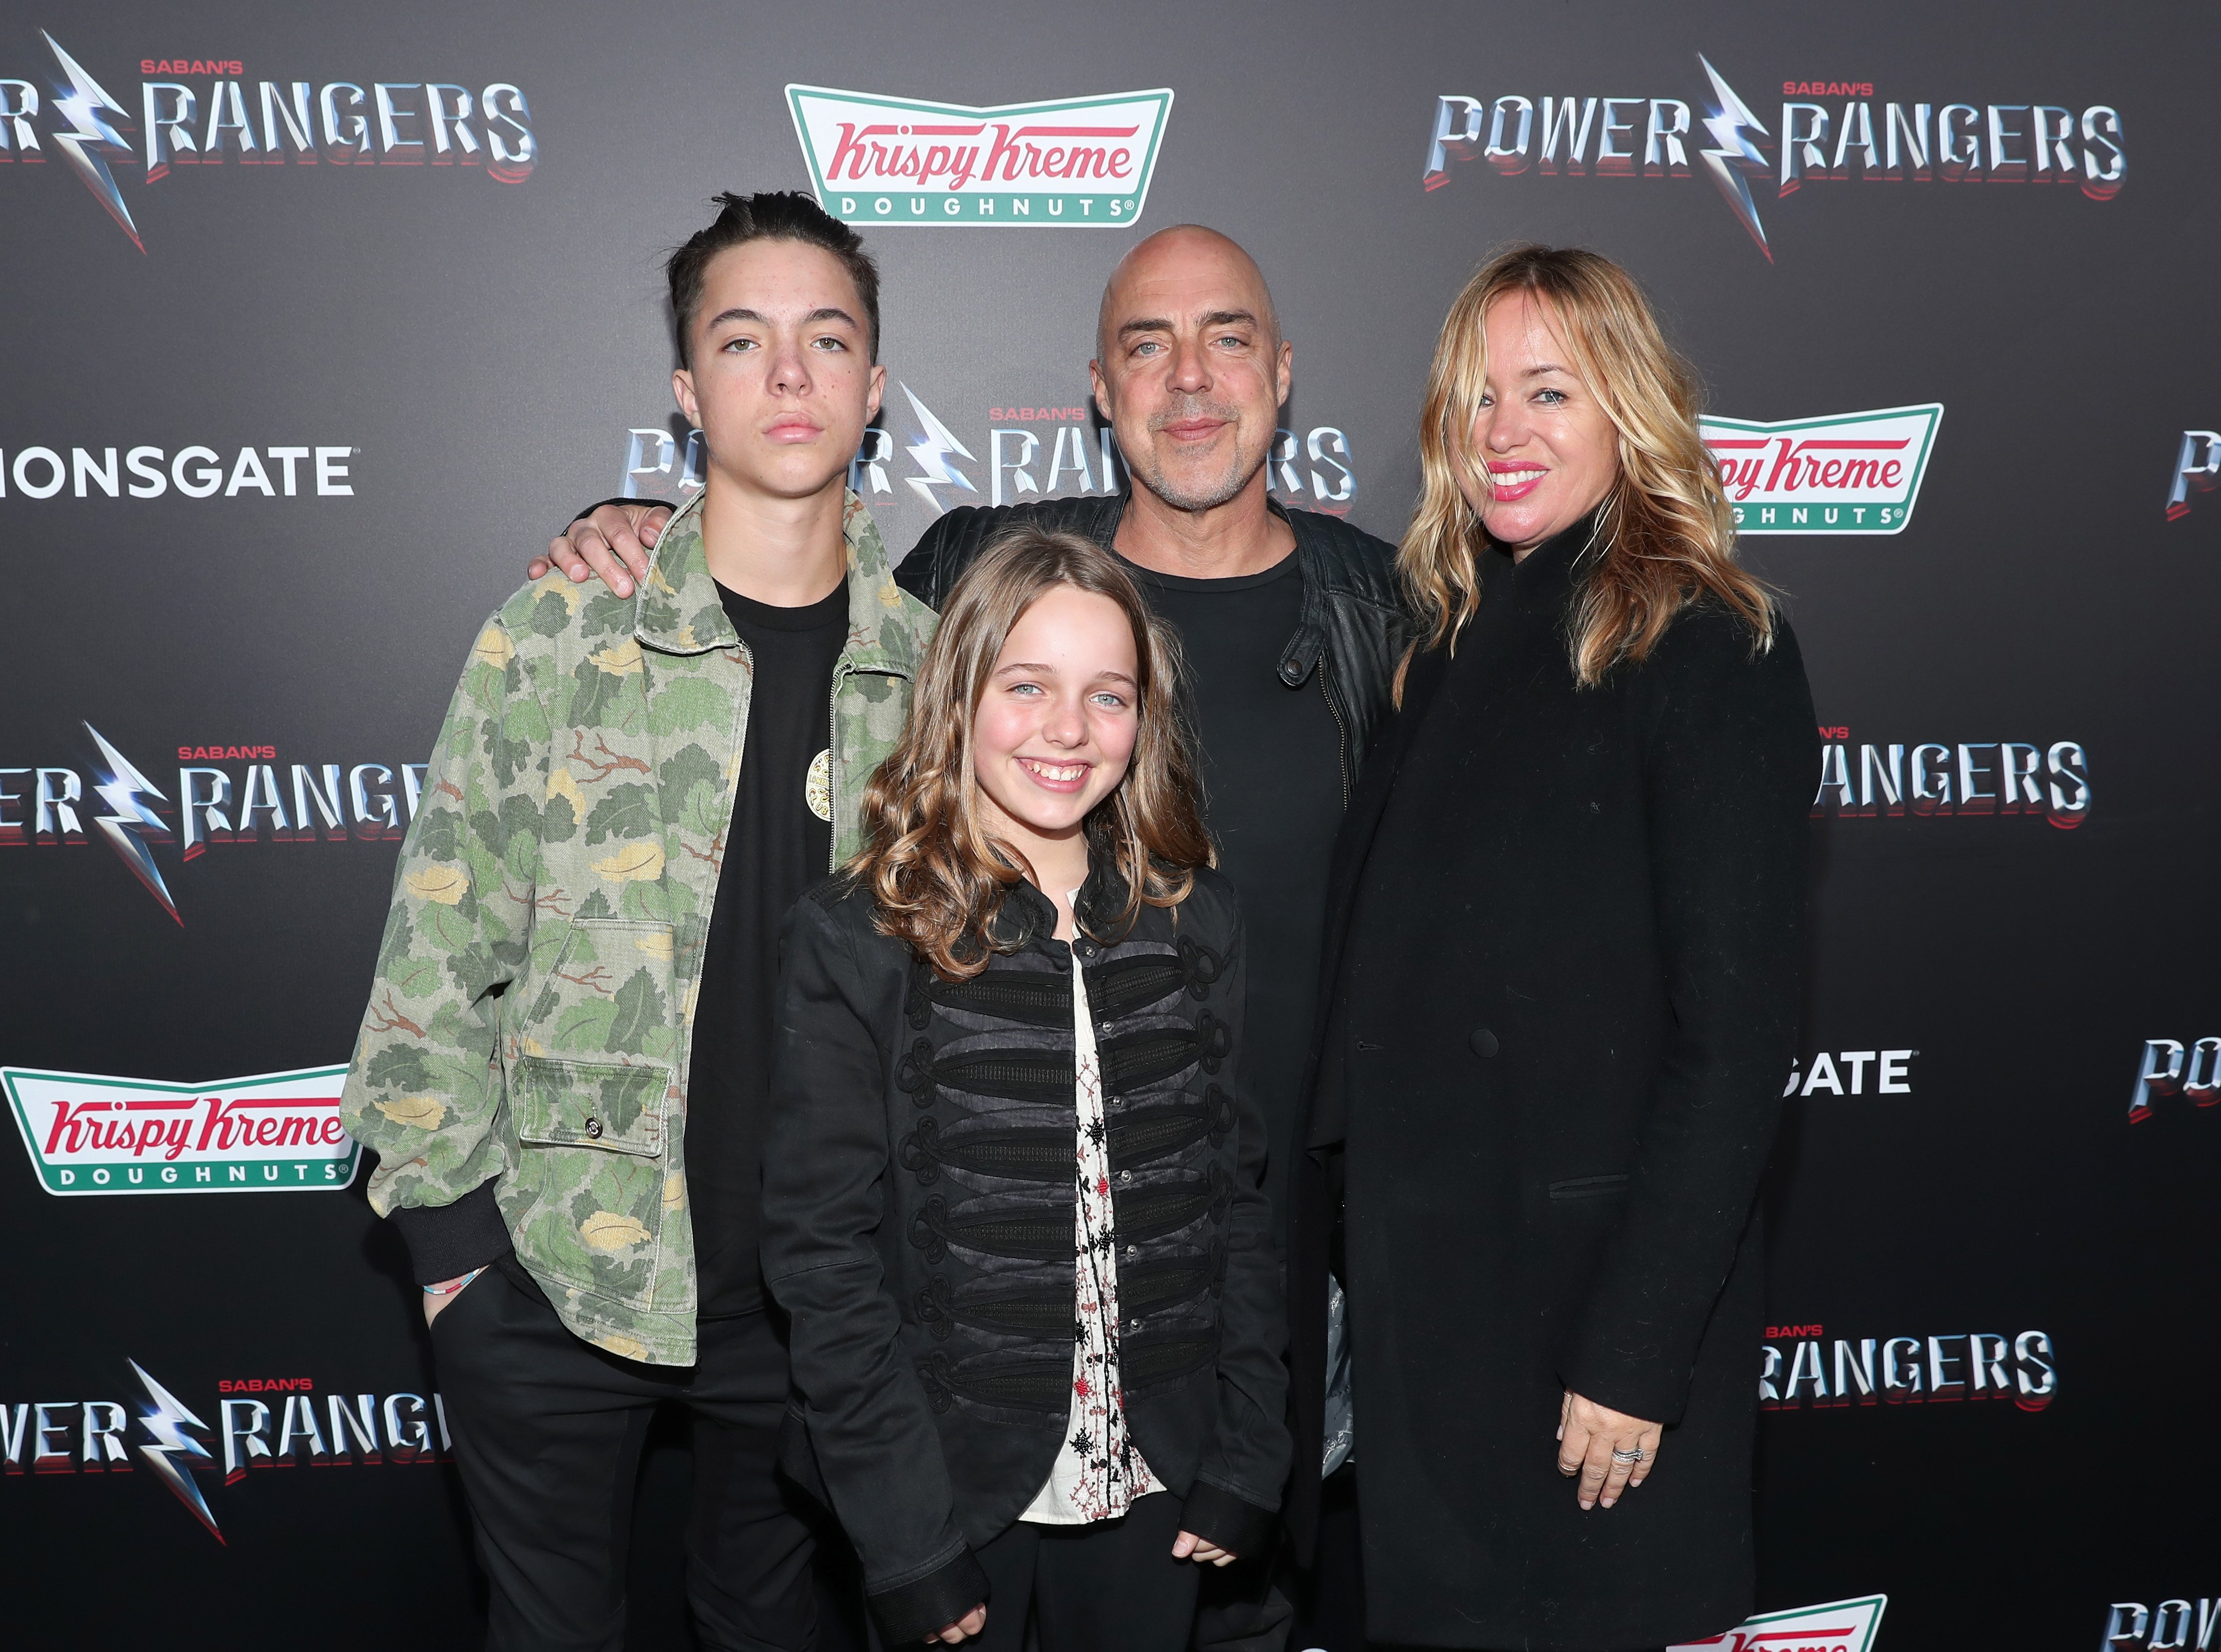 (L-R) Quinn Welliver, Cora McBride, Titus Welliver and Jose Stemkens at The LA Premiere of Saban's Power Rangers presented by Lionsgate at Fox Bruin Theatre on March 22, 2017, in Los Angeles, California. | Source: Getty Images 